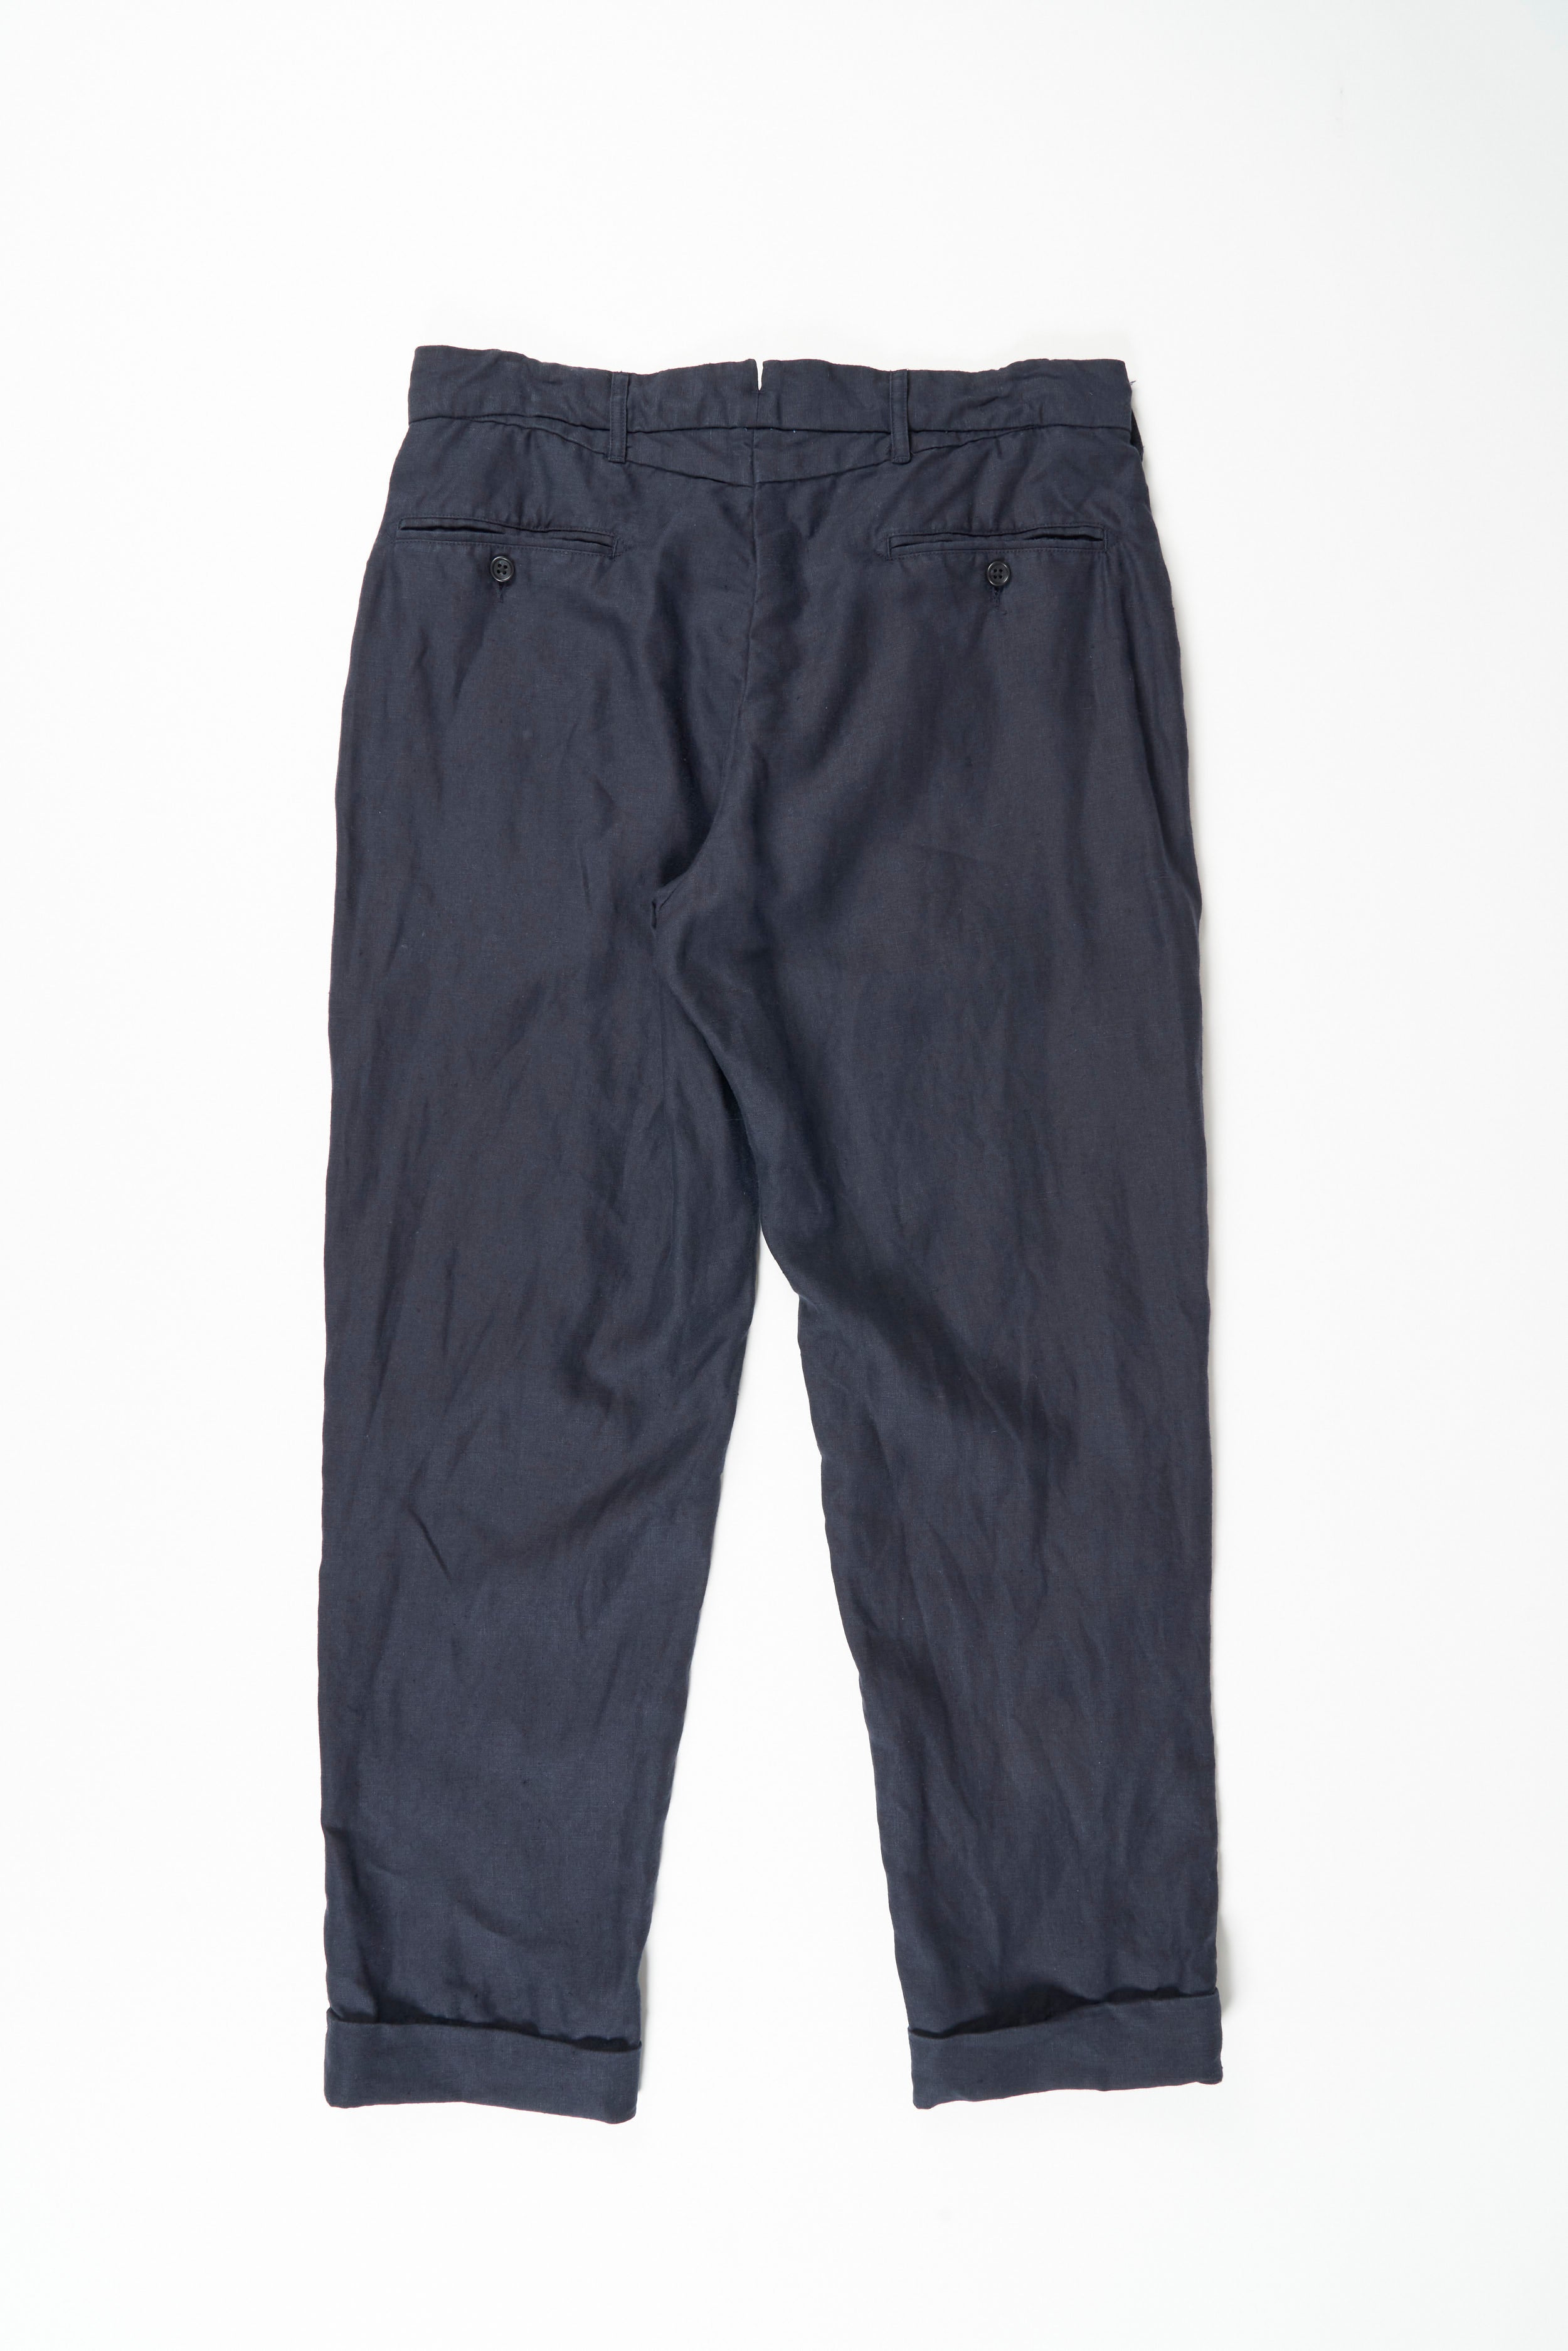 Andover Pant - Navy Linen Twill